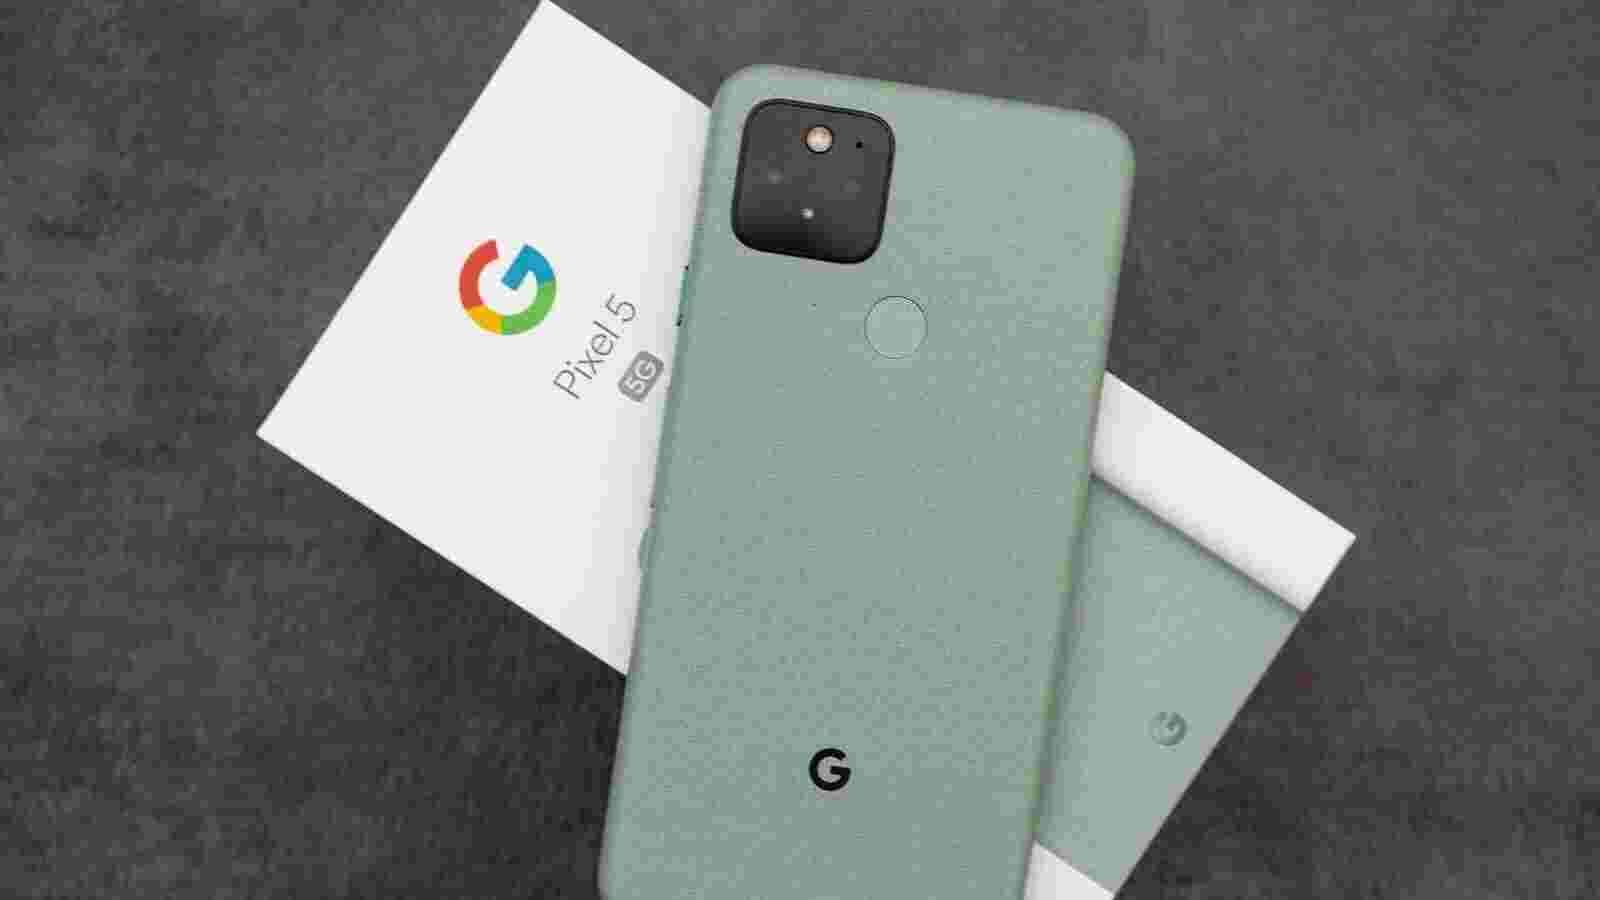 Google phones available for Enterprise. — Pixel for Business